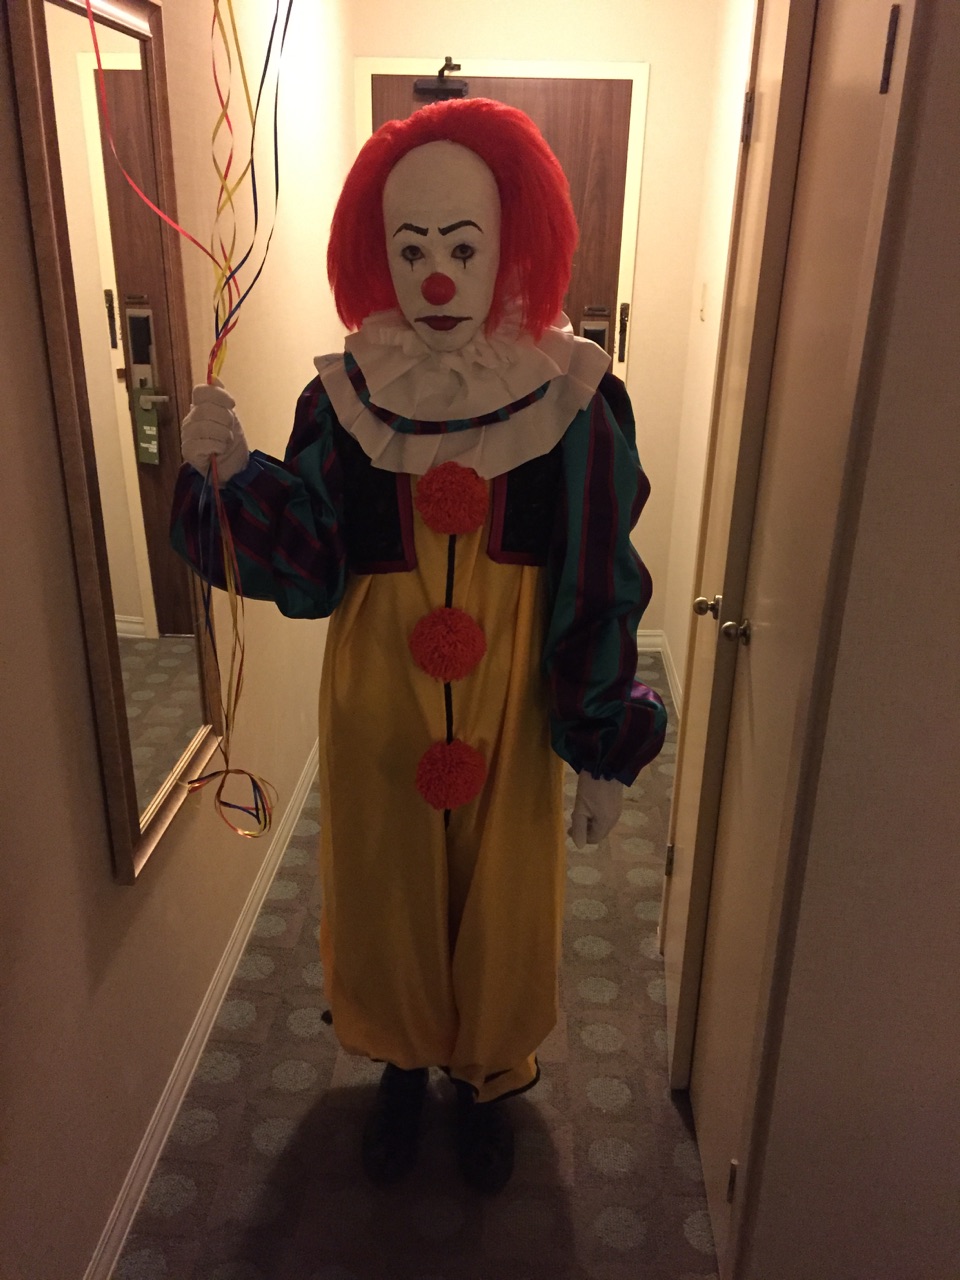 Pennywise The Dancing Clown from Stephen King's IT (1990) | RPF Costume and  Prop Maker Community